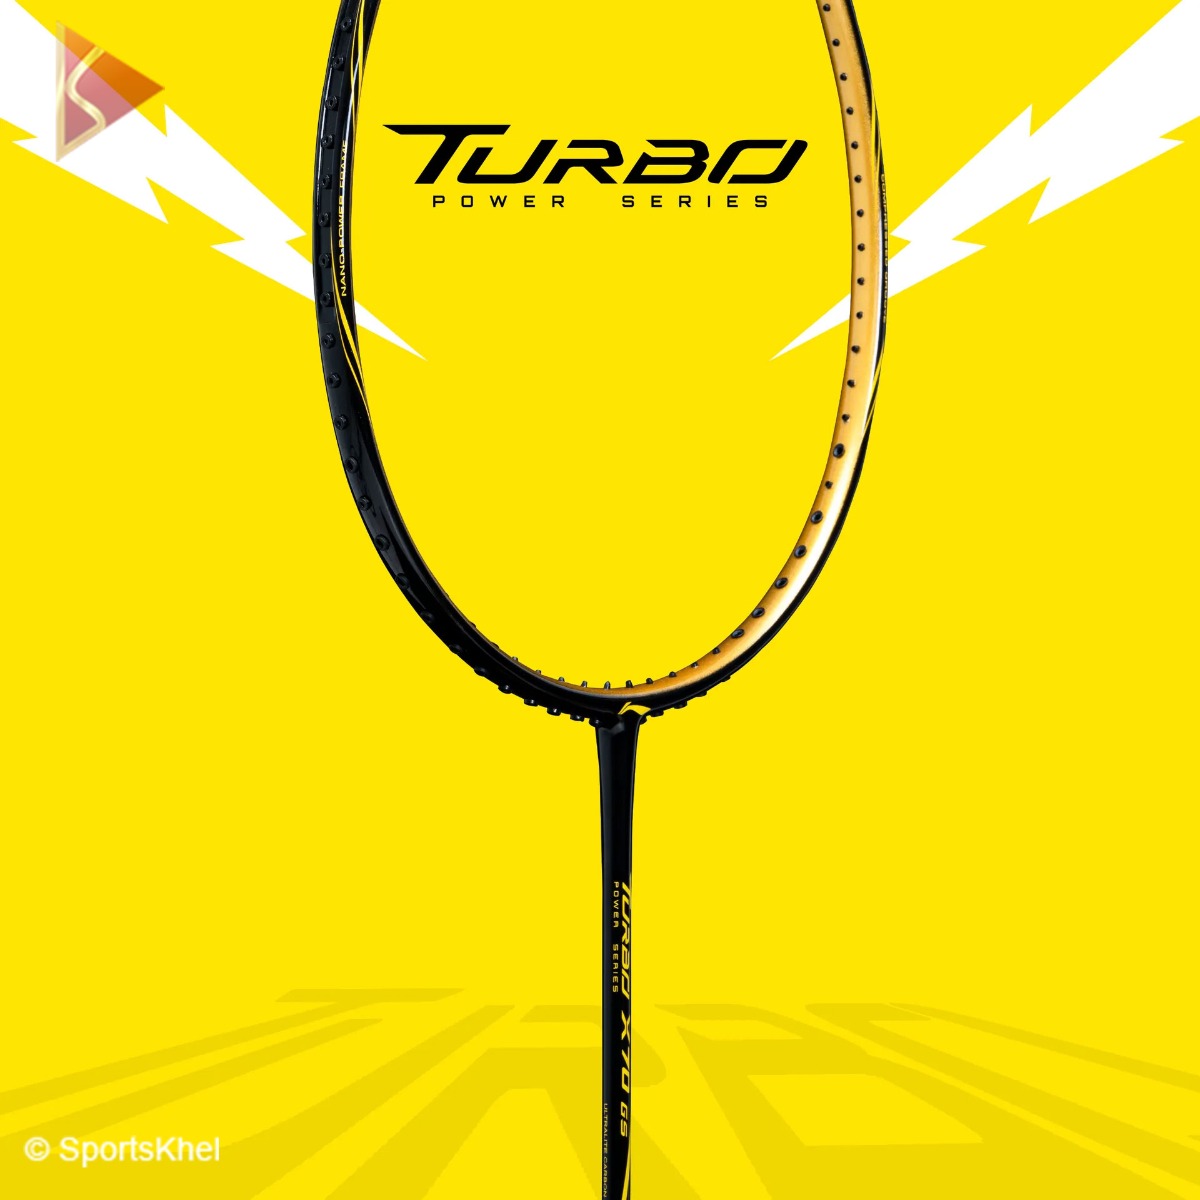 Lining Badminton Racket Features Powerful Strikes